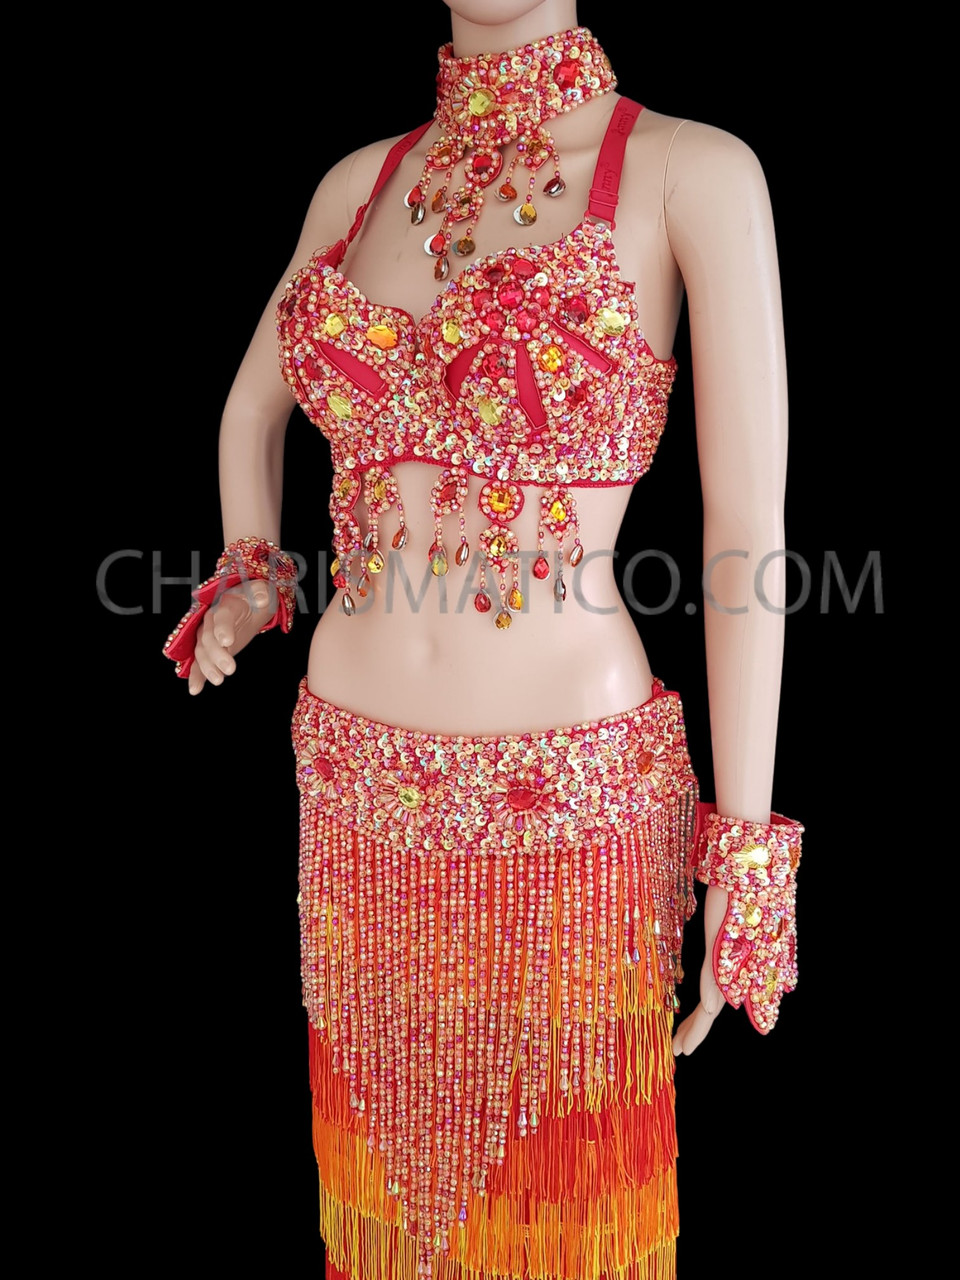 Aesthetically Pleasing Belly Dancing Costume In Orange And Red Sequin Work